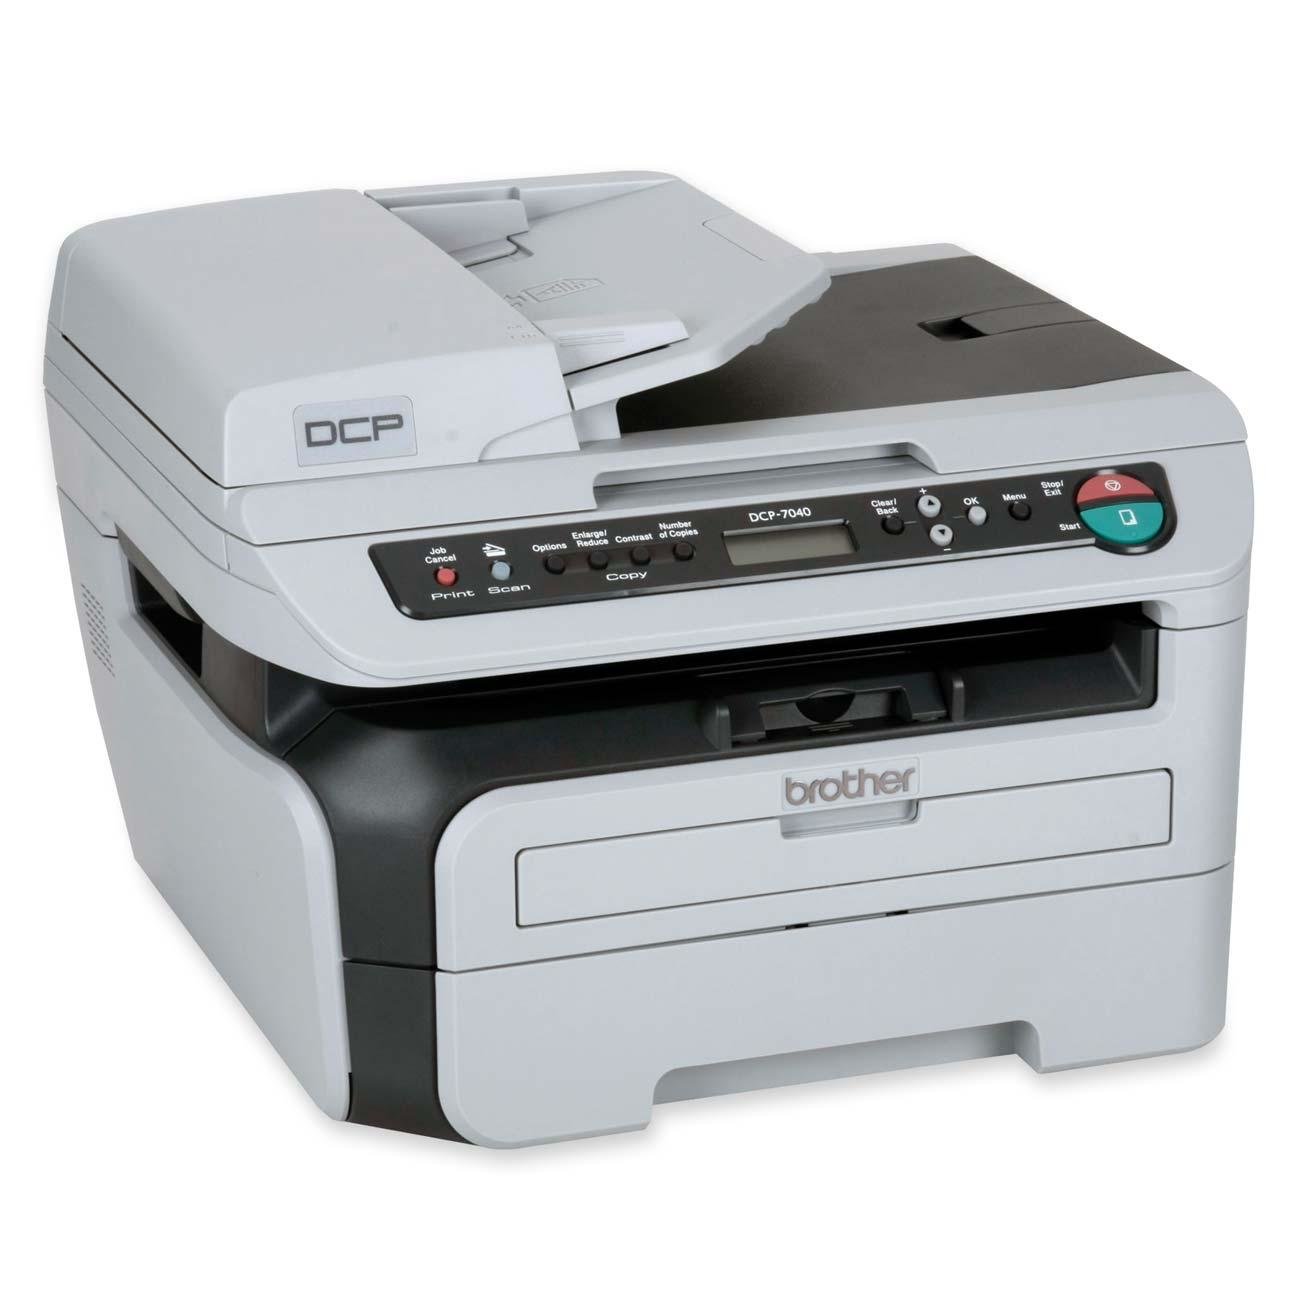 Brother DCP-7040 Laser Multifunction Copier with Auto Document Feeder